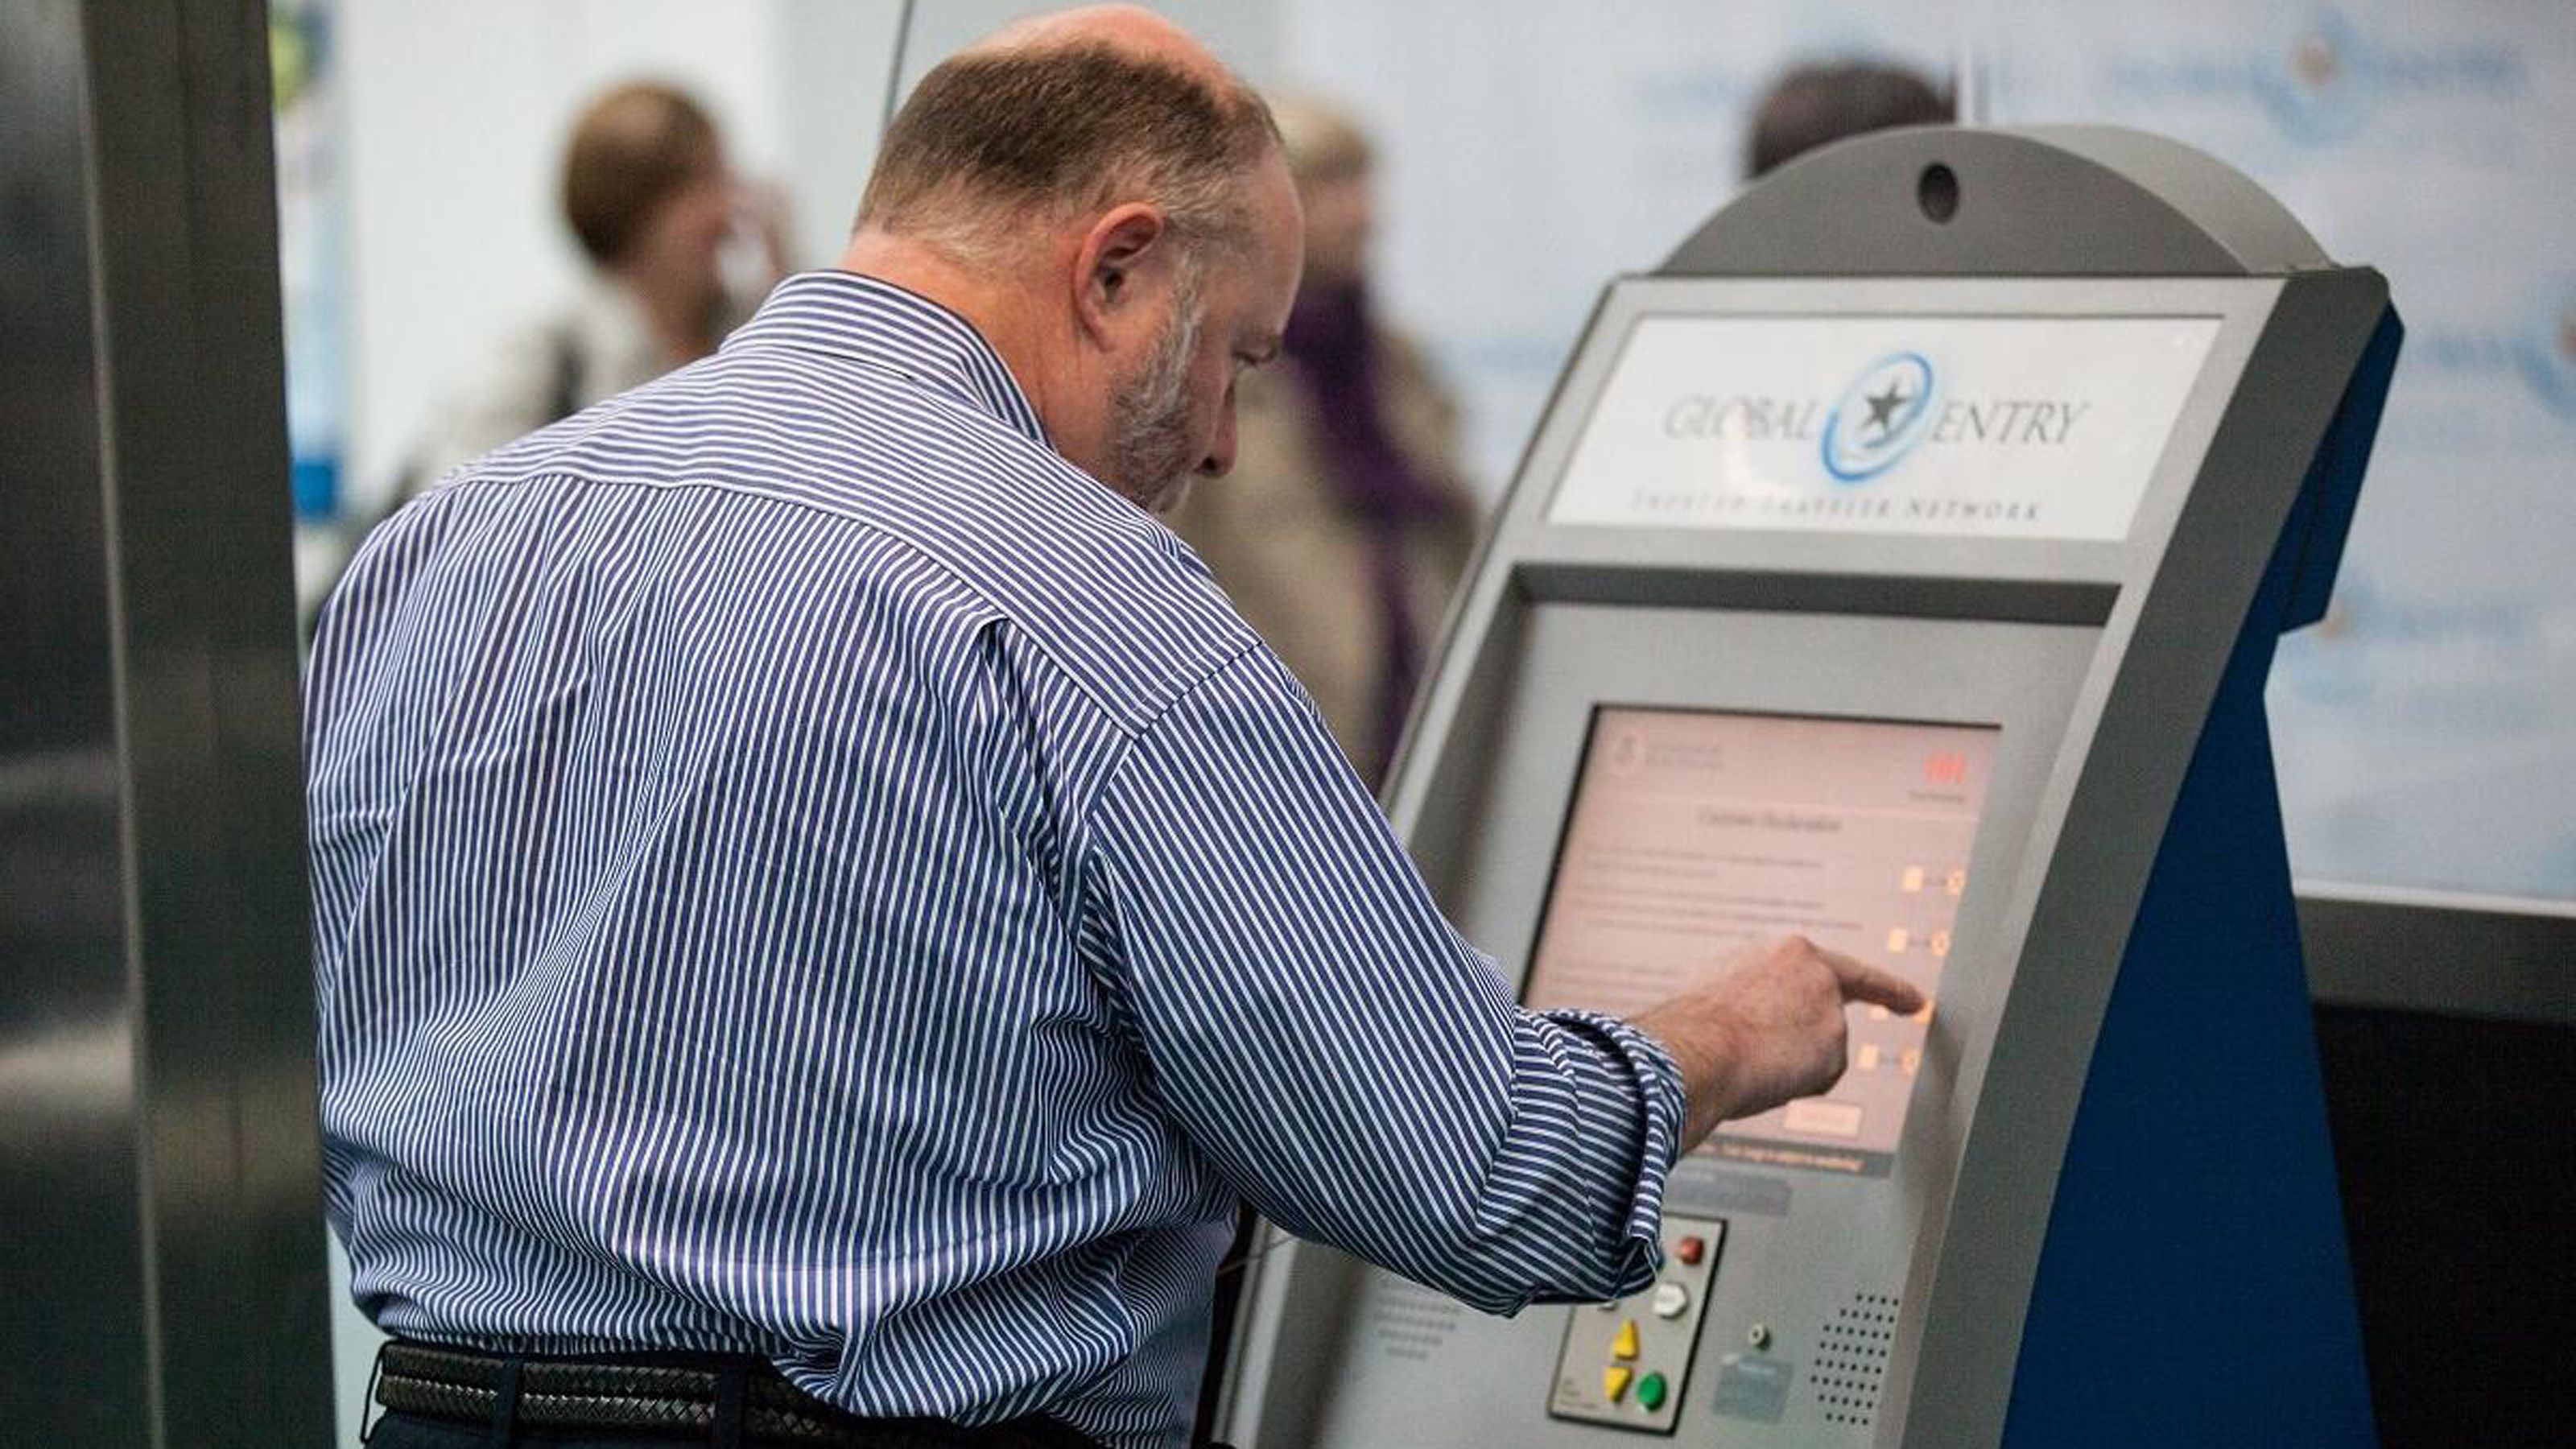 US Global Entry enrollment centers to reopen after coronavirus